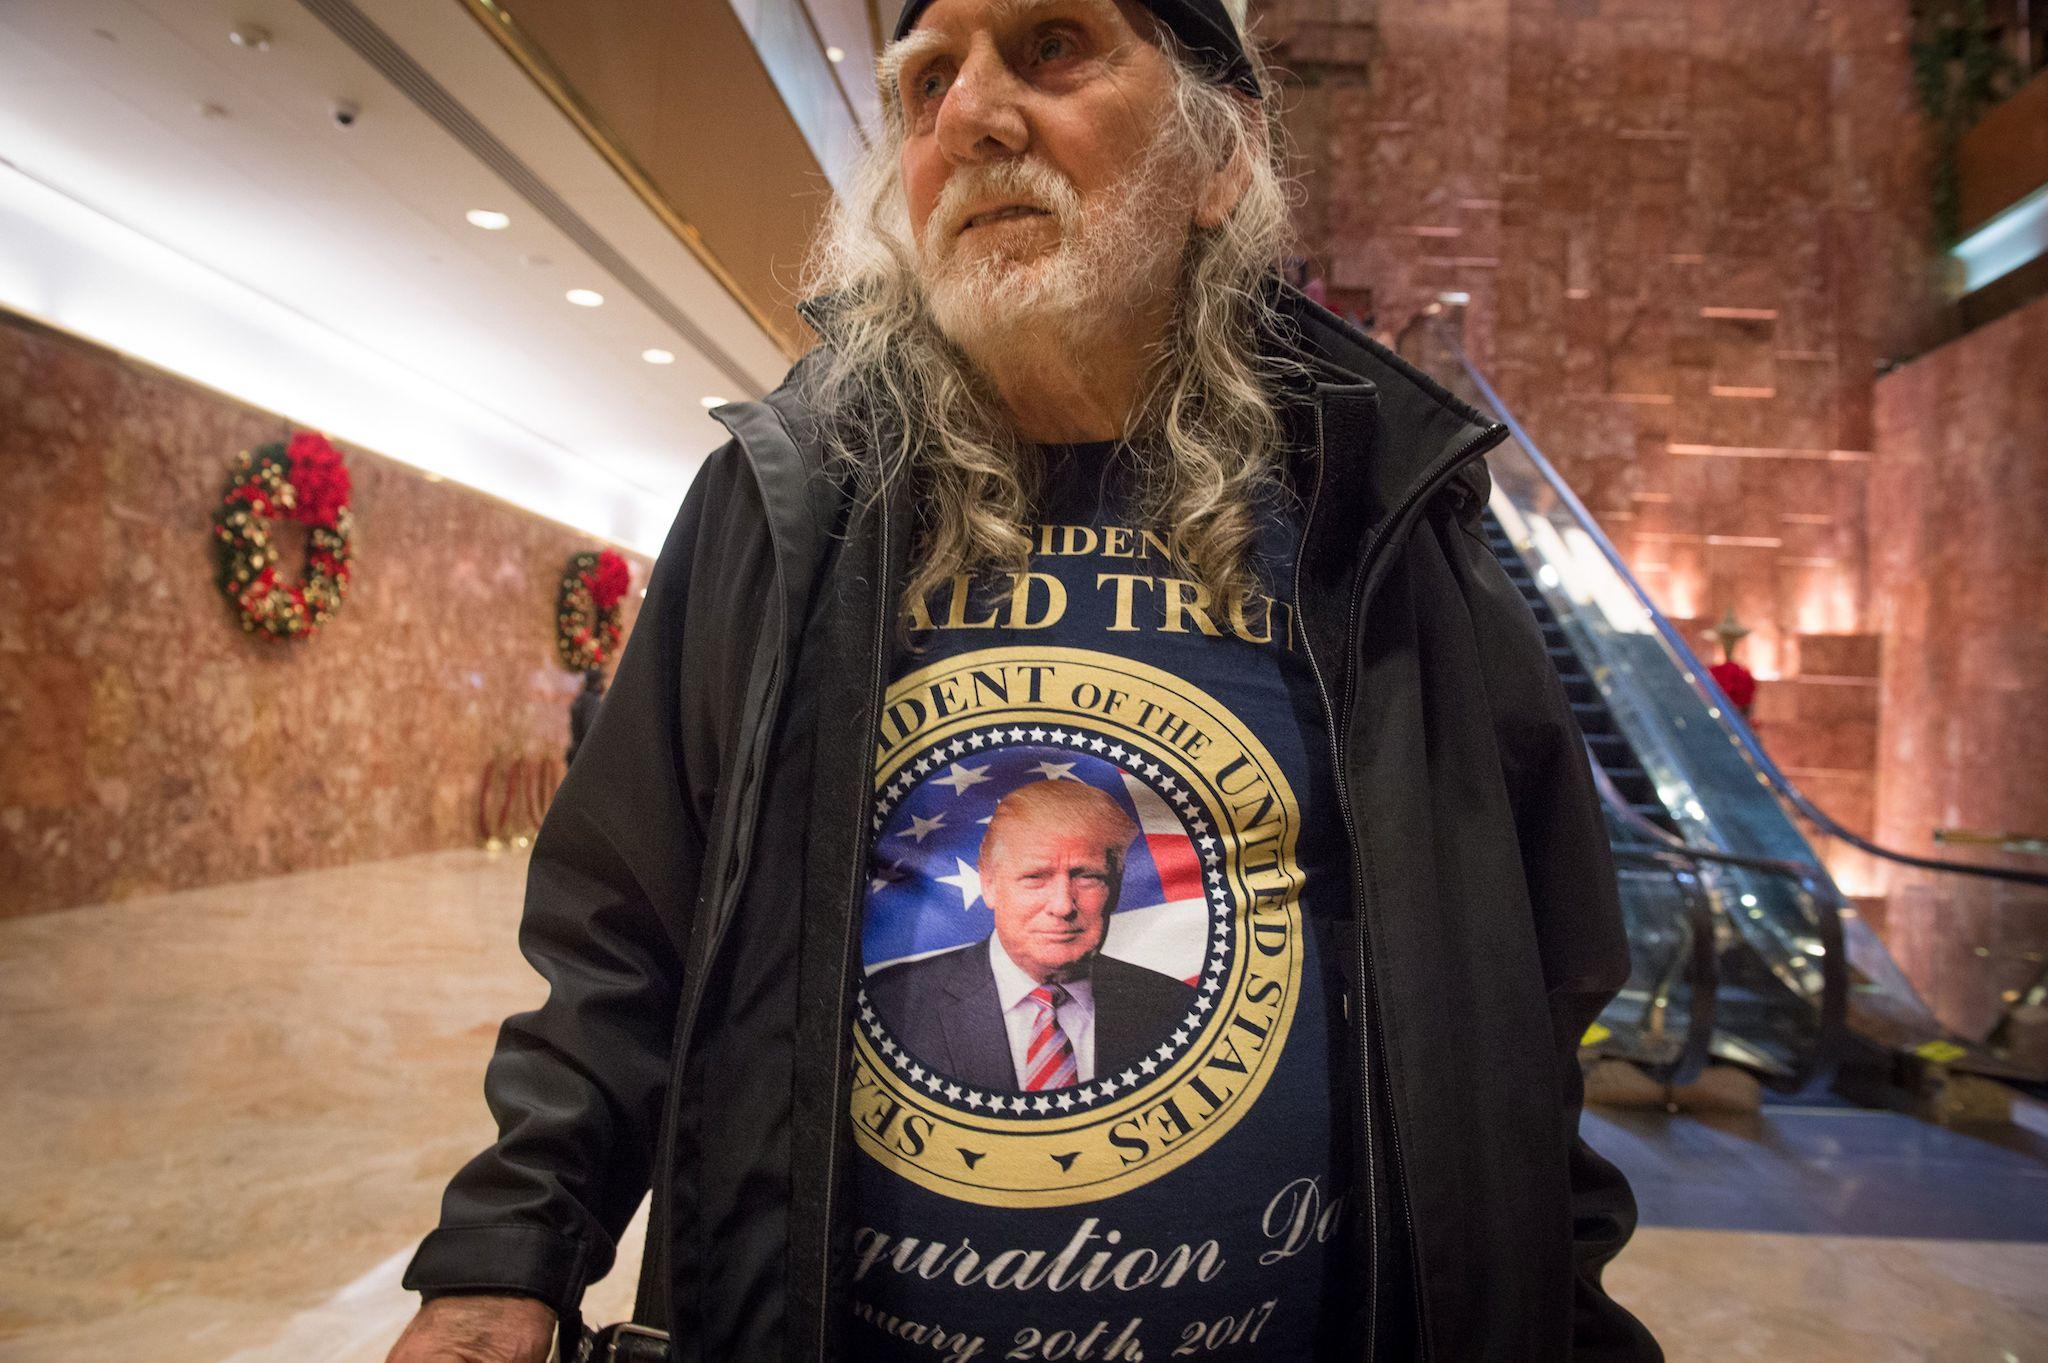 President-elect Donald Trump supporter Pier Fenzi of New Jersey stands in the lobby of Trump Tower November 29, 2016 in New York